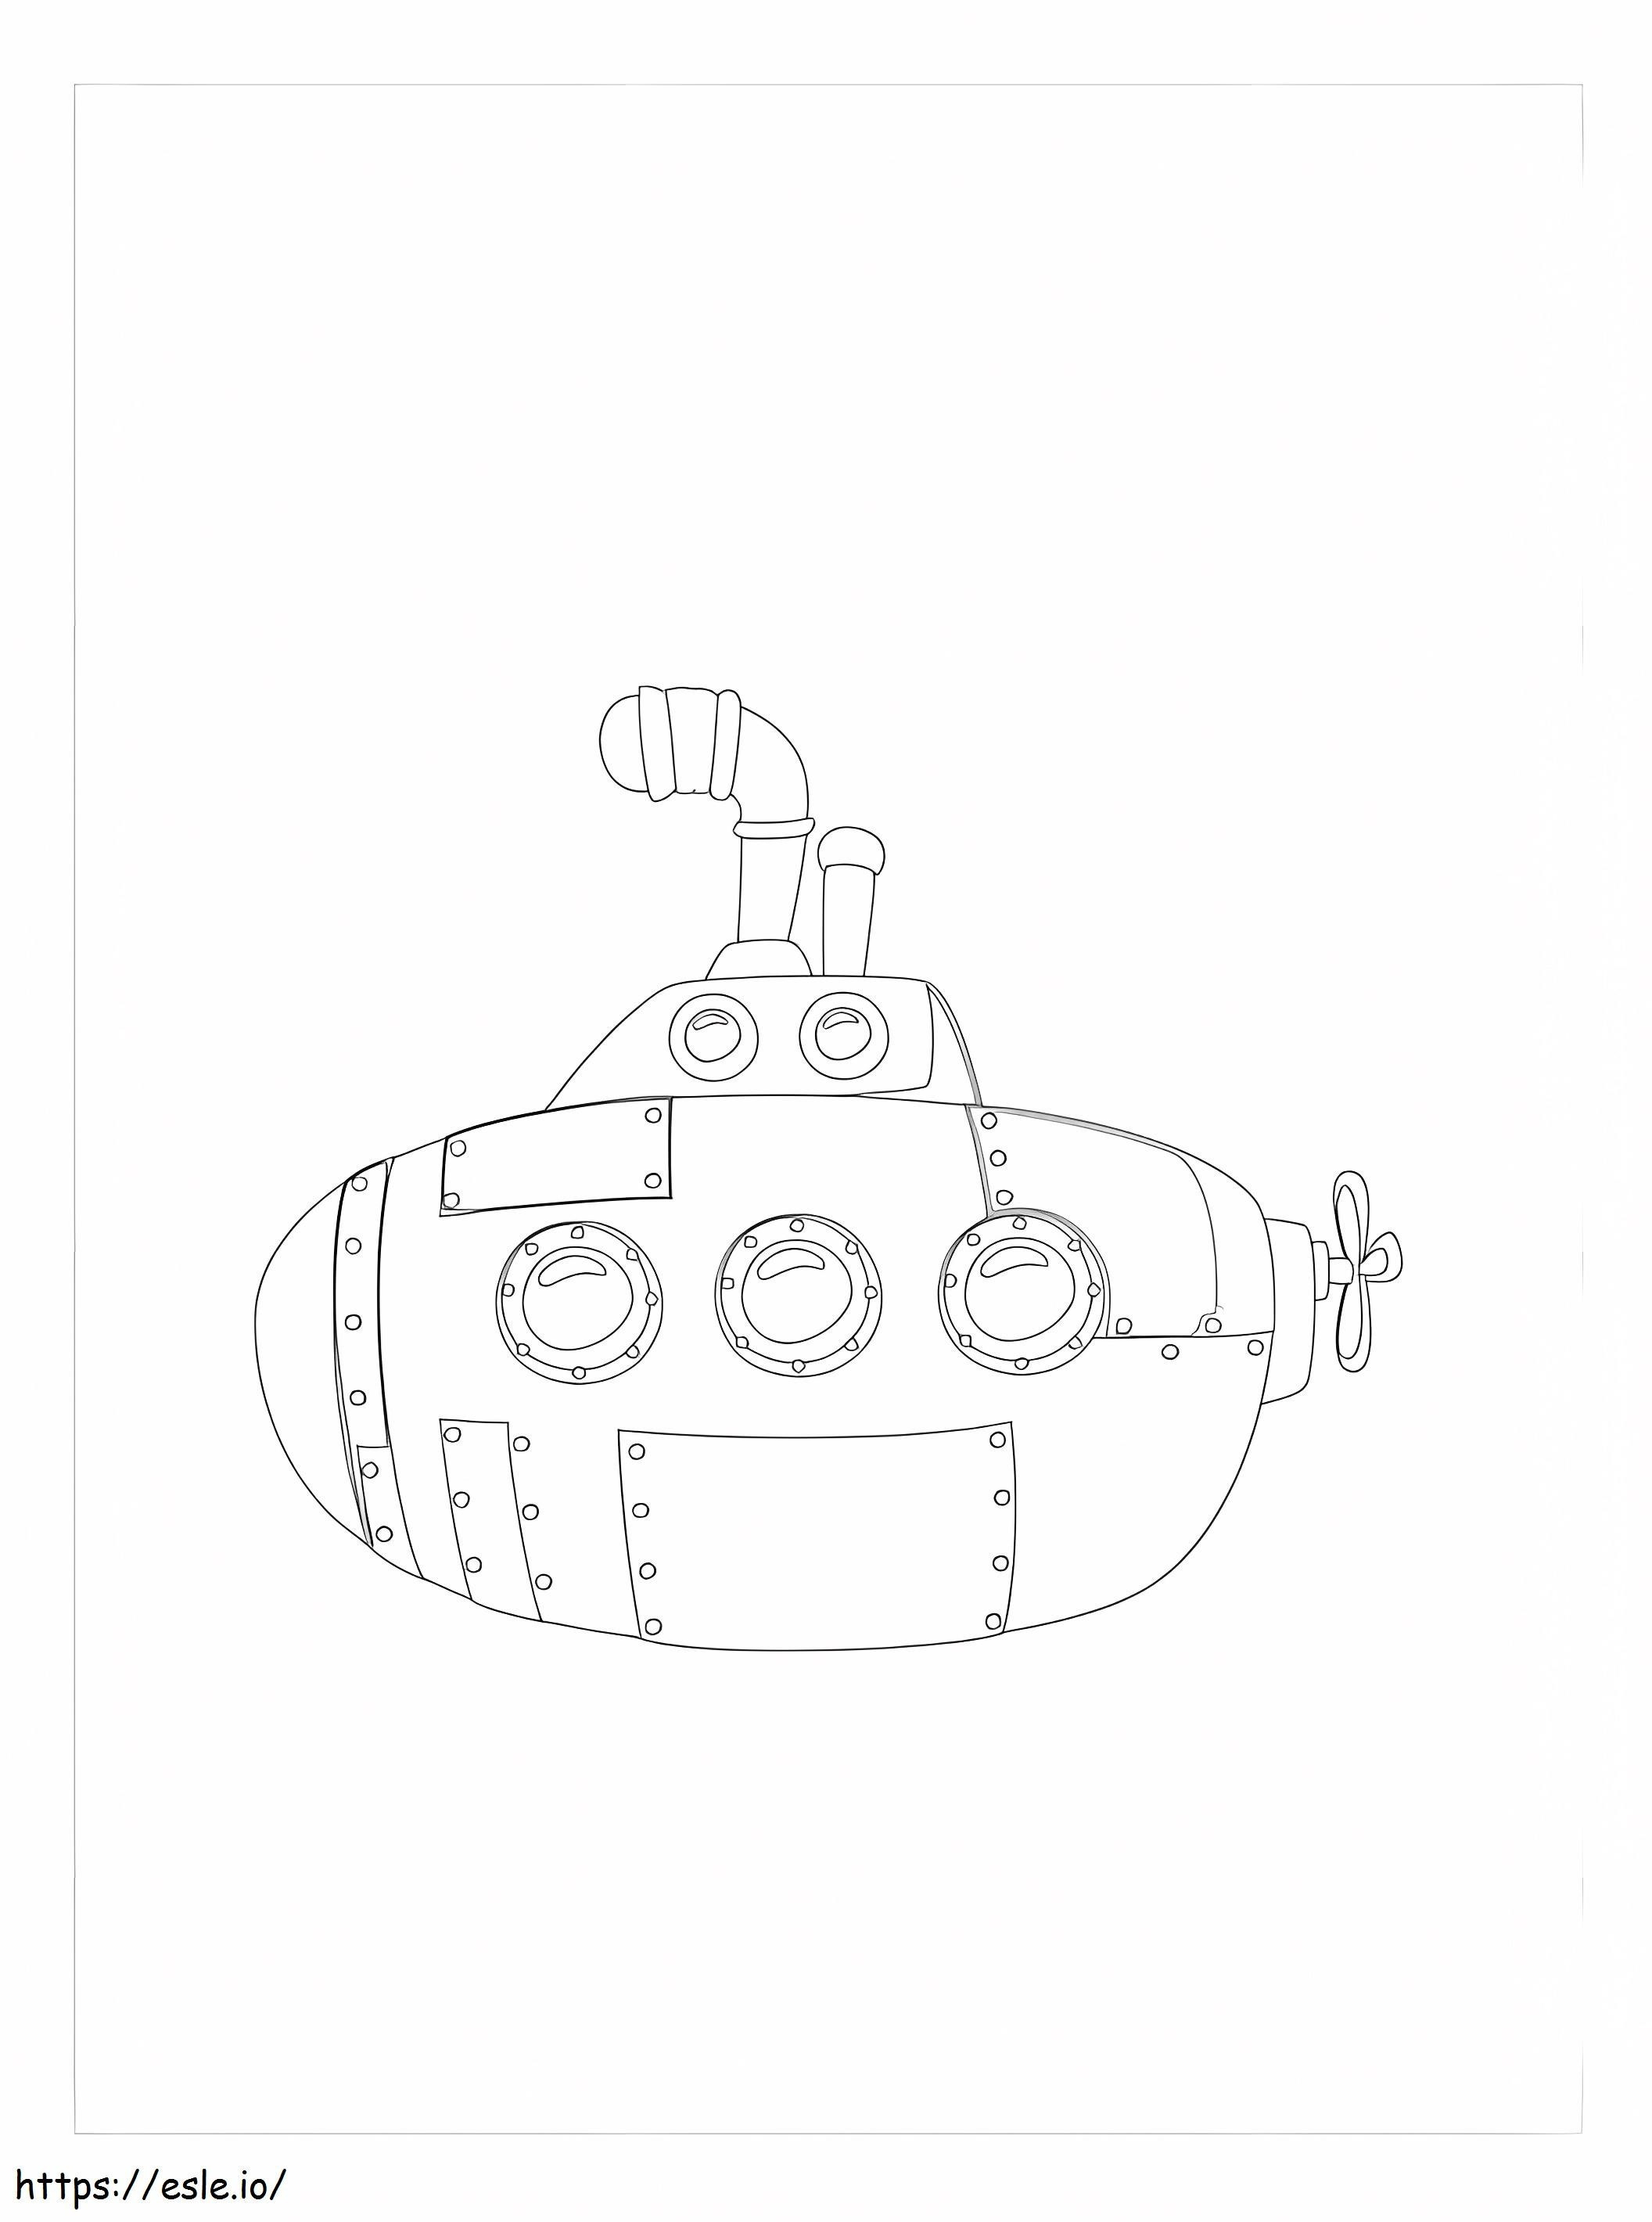 Yellow Submarine coloring page